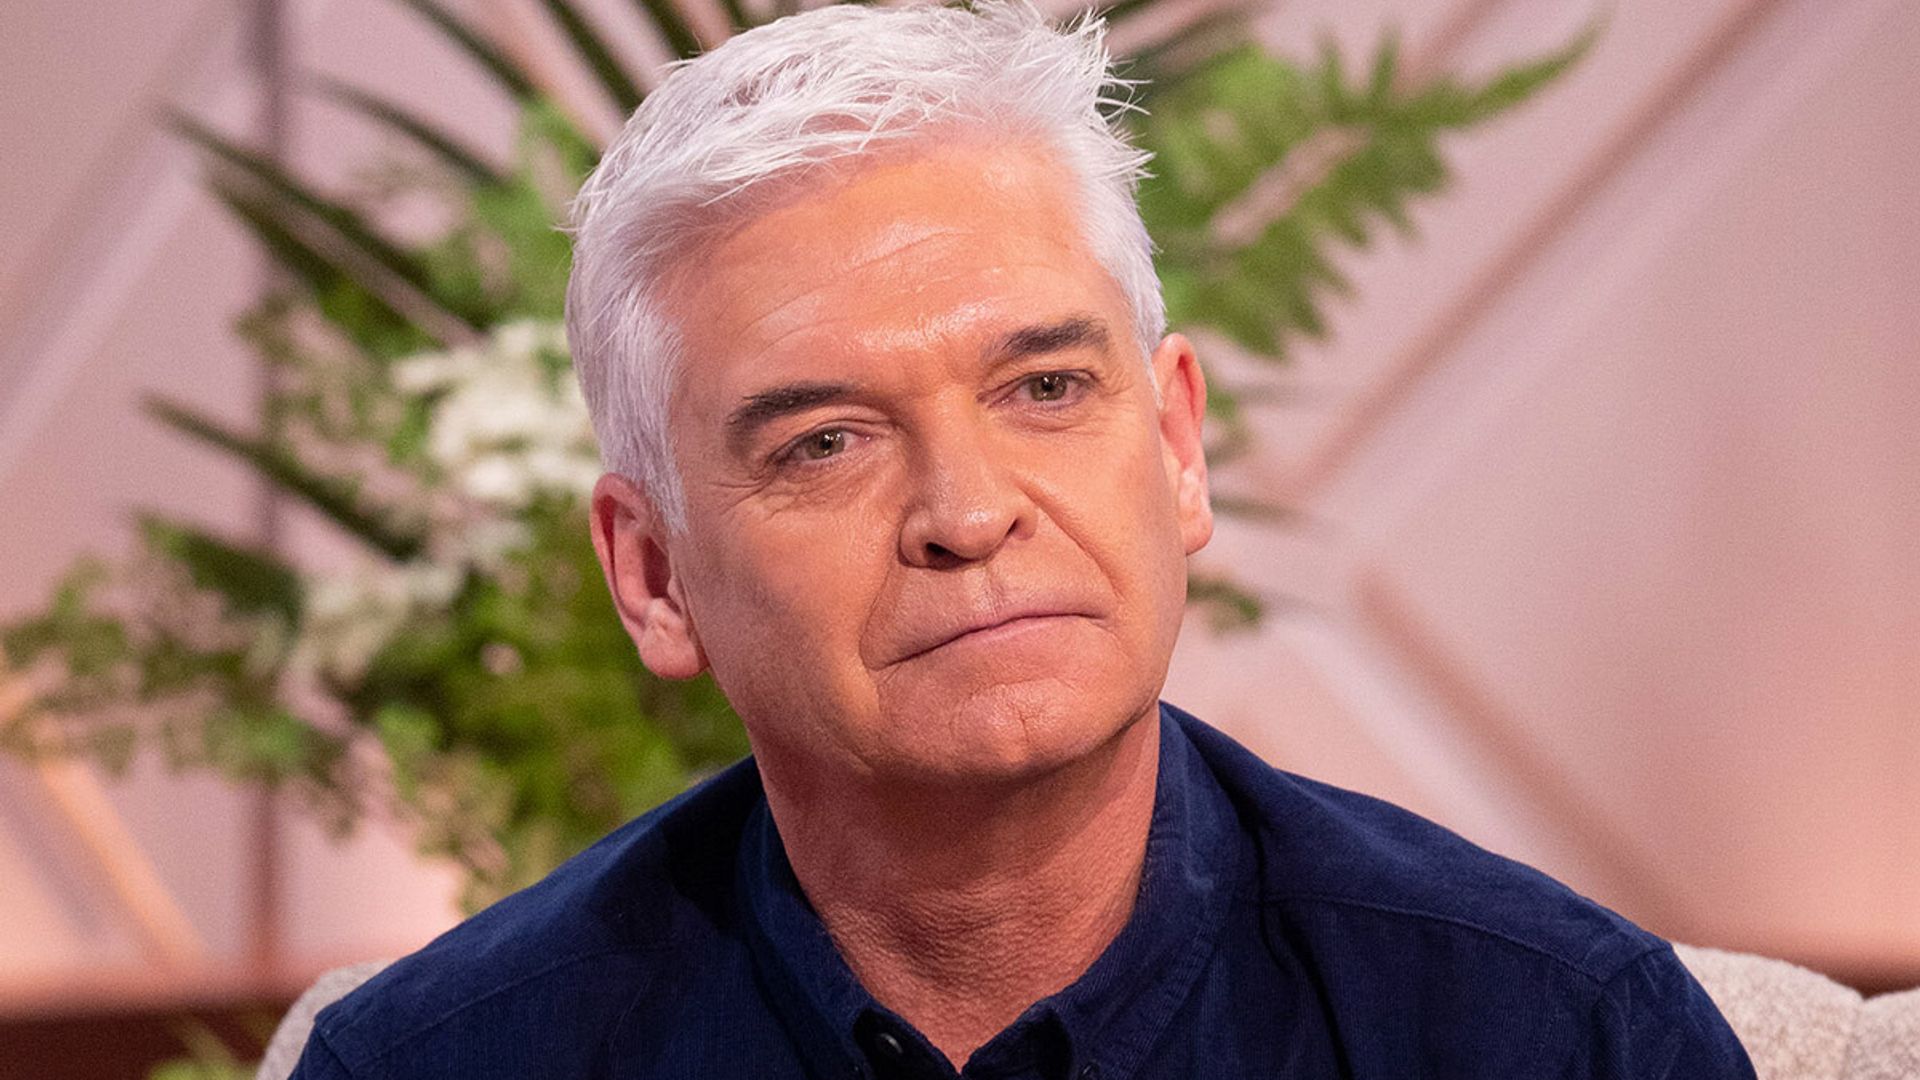 Phillip Schofield makes rare comment on marriage and 'changes' in family